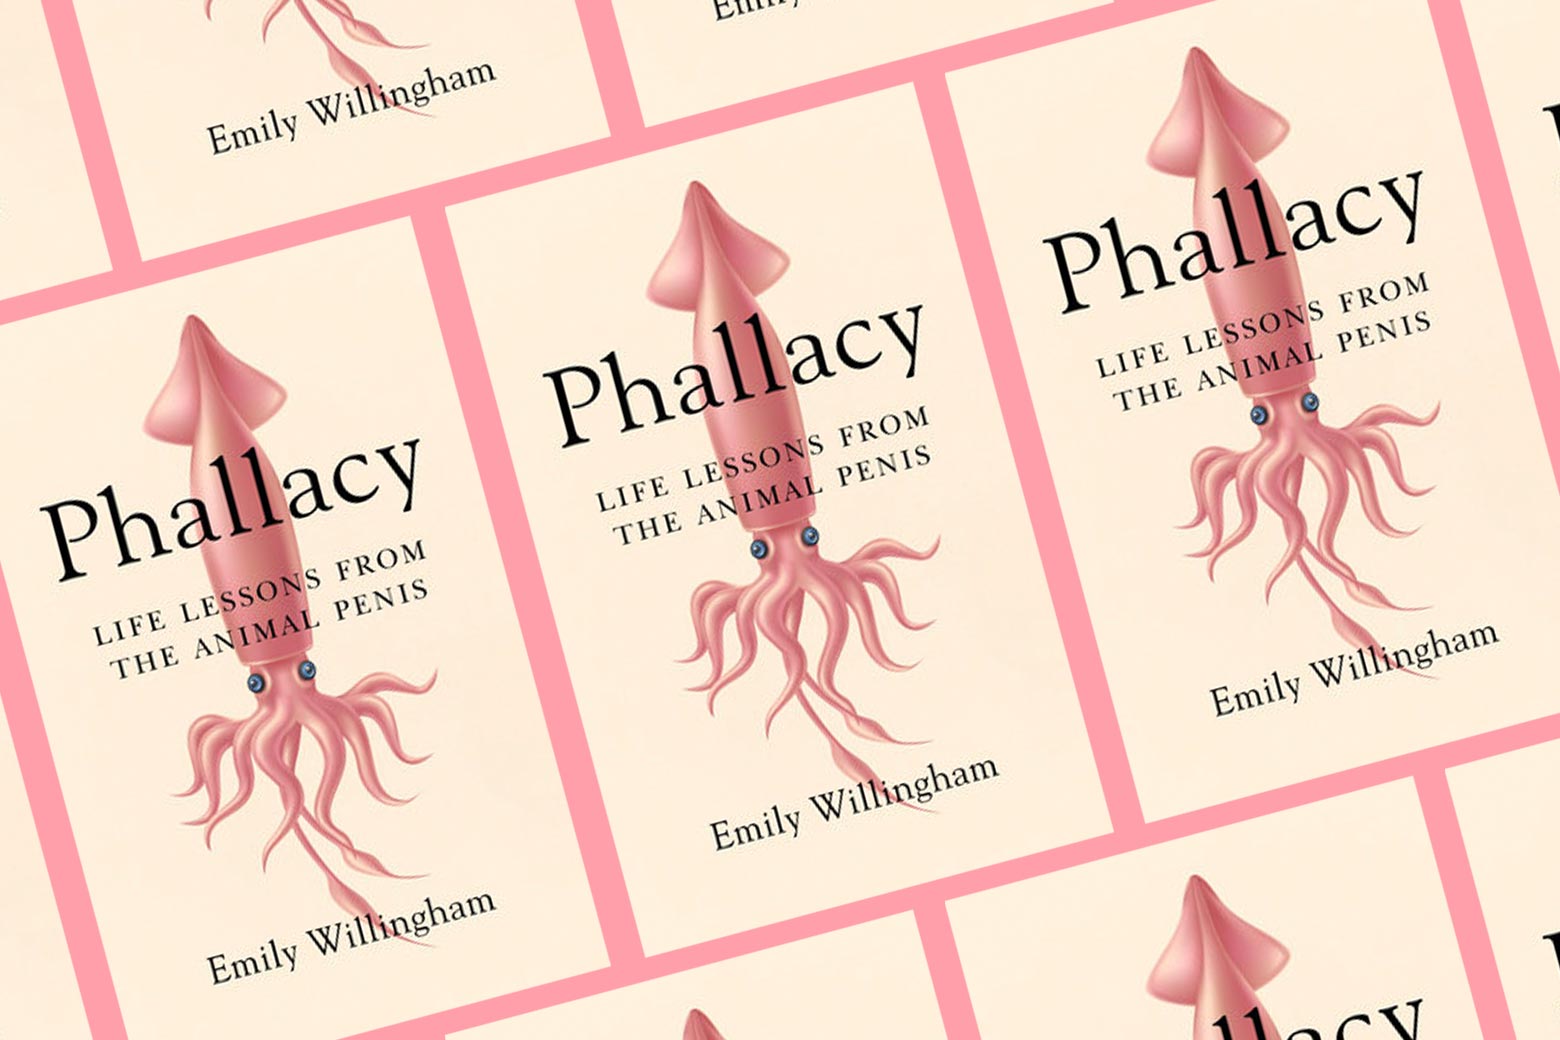 The cover of Emily Willingham's book Phallacy appears multiple times.